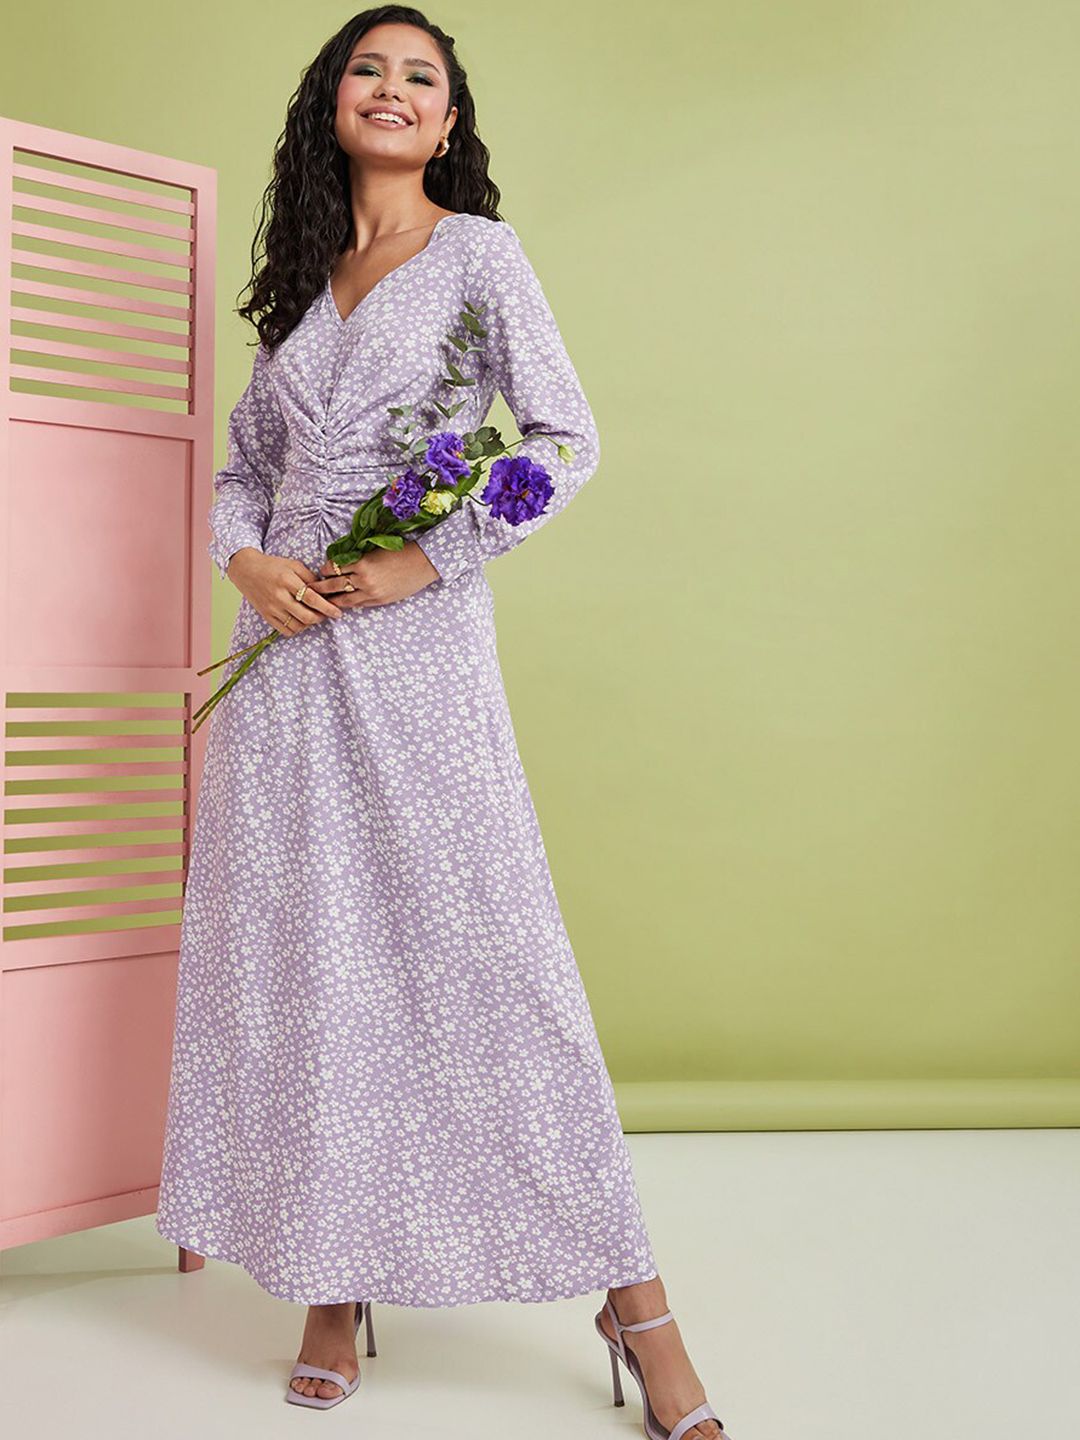 Styli Lavender Floral Maxi Dress Price in India